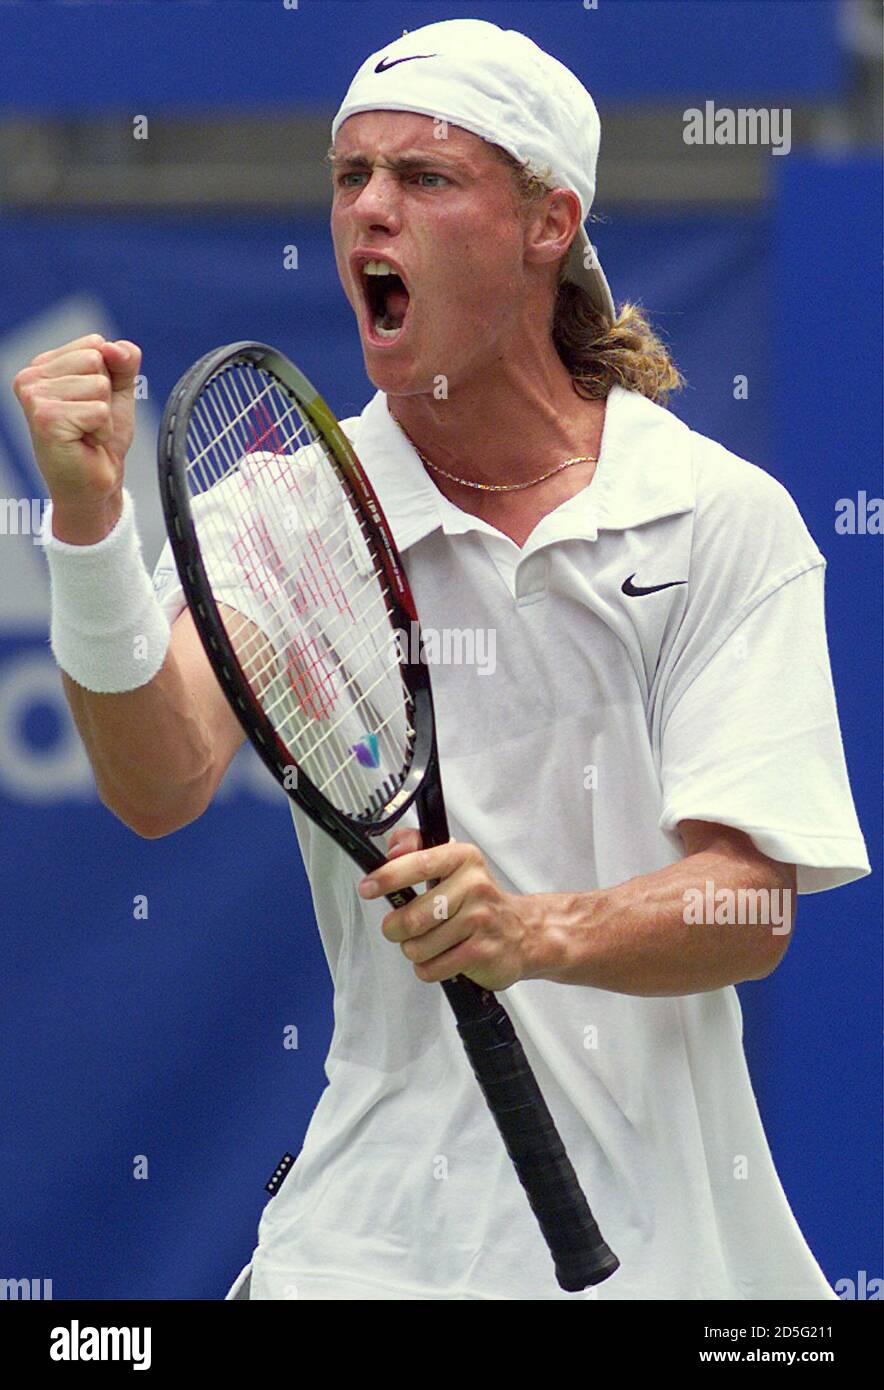 Lleyton Hewitt from Australia reacts after making a passing shot on his way  to defeating [compatriate Jason Stoltenberg] in the Mens singles final at  the Sydney international tennis tournament January 15. Hewitt